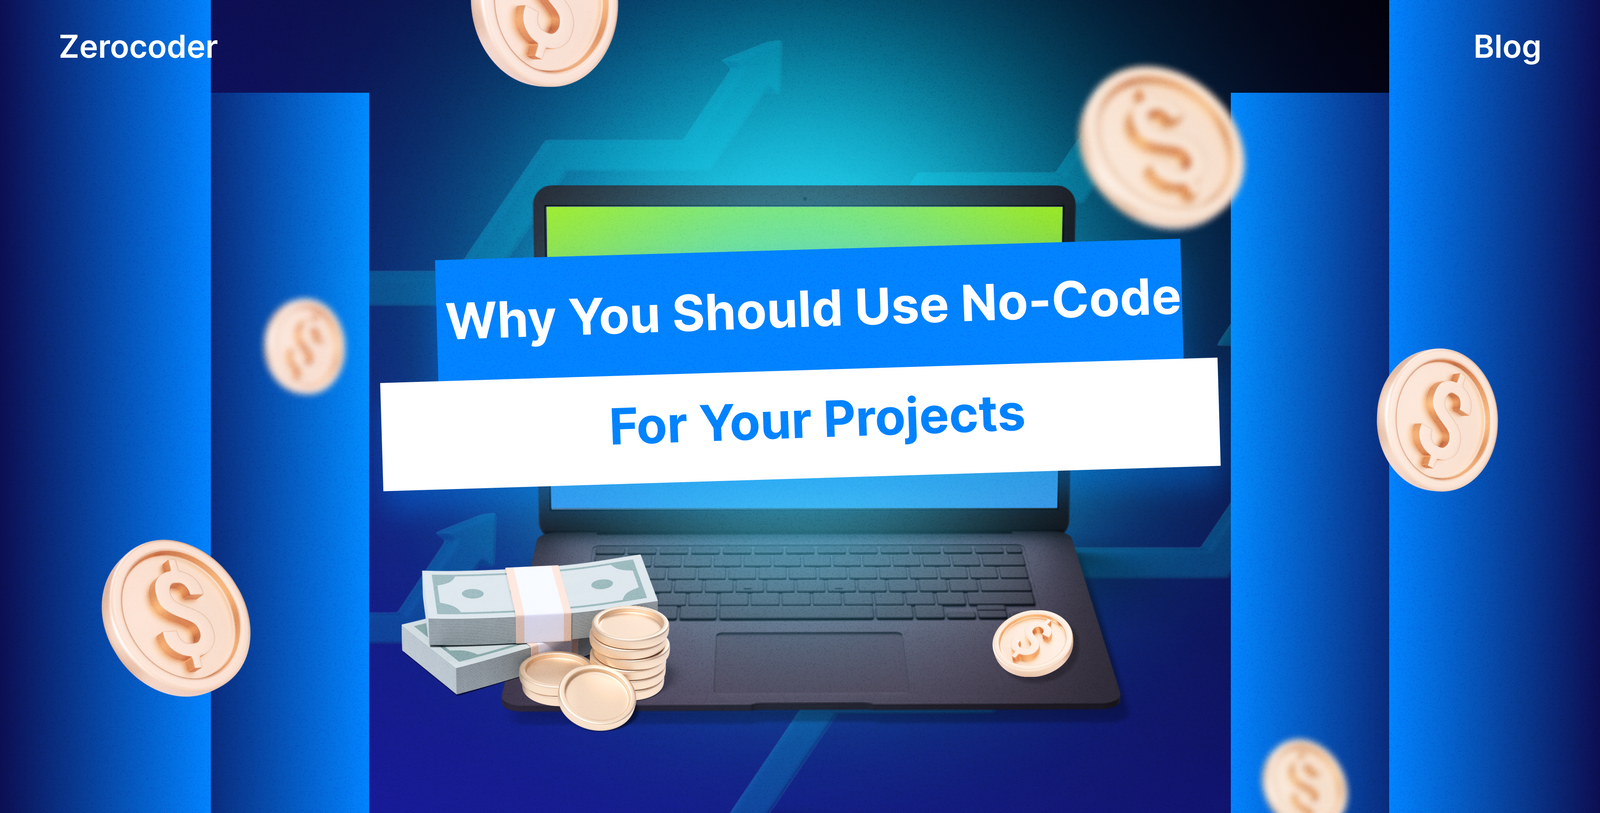 Why people should use no-code for startups